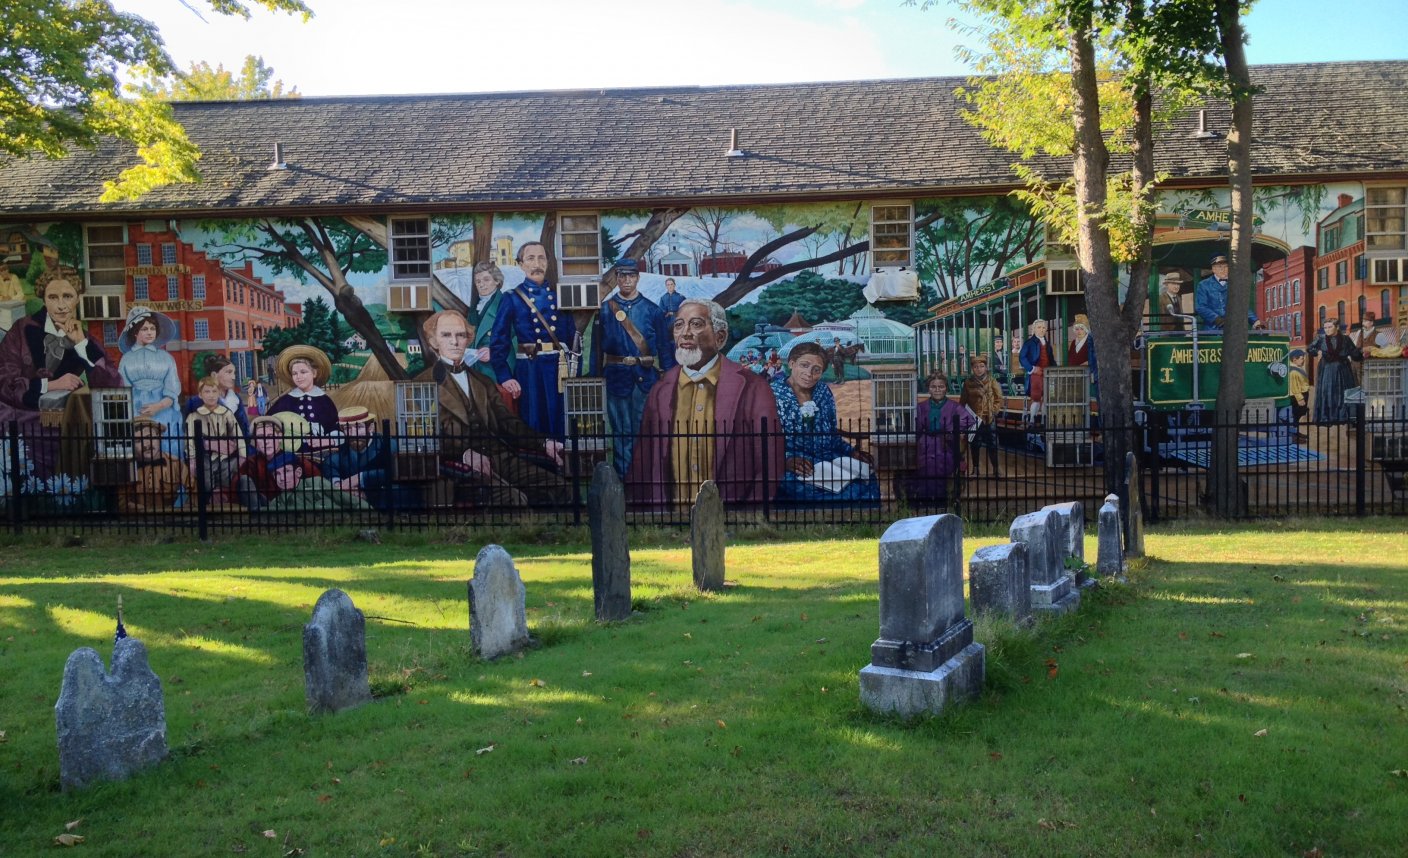 Amherst Cemetery Mural, representing an approach to Community Engaged Learning